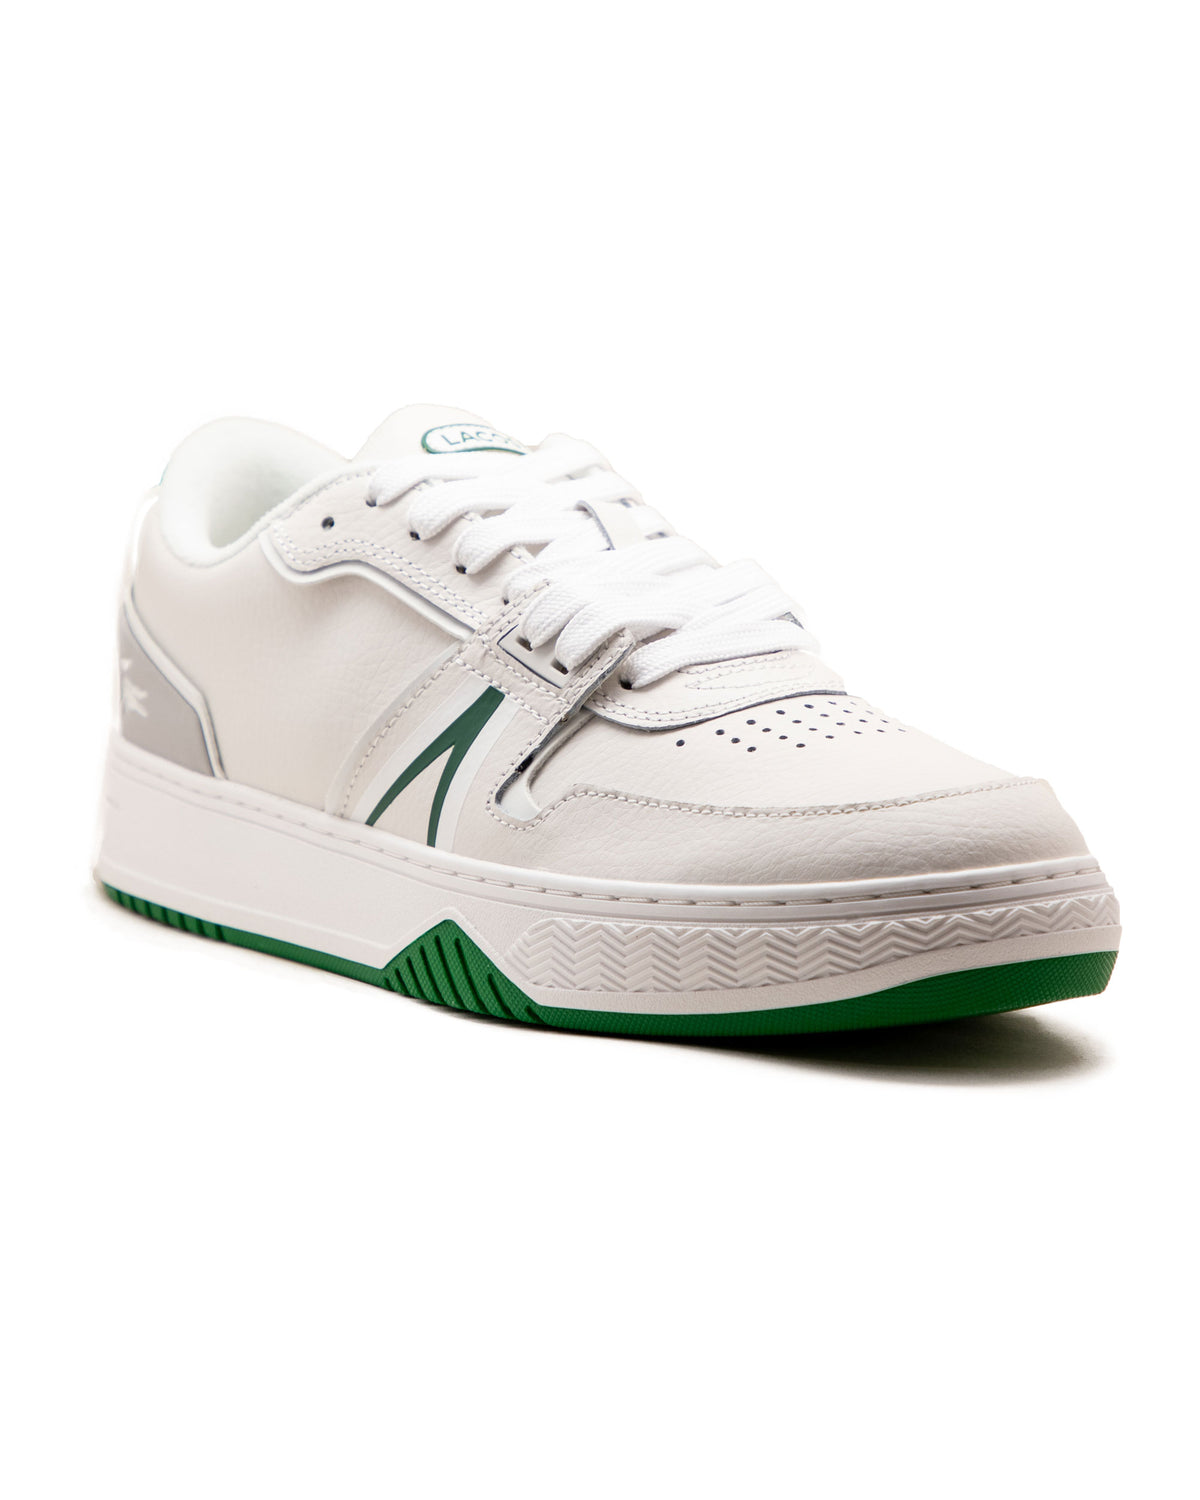 Sneakers Lacoste L001 White Green